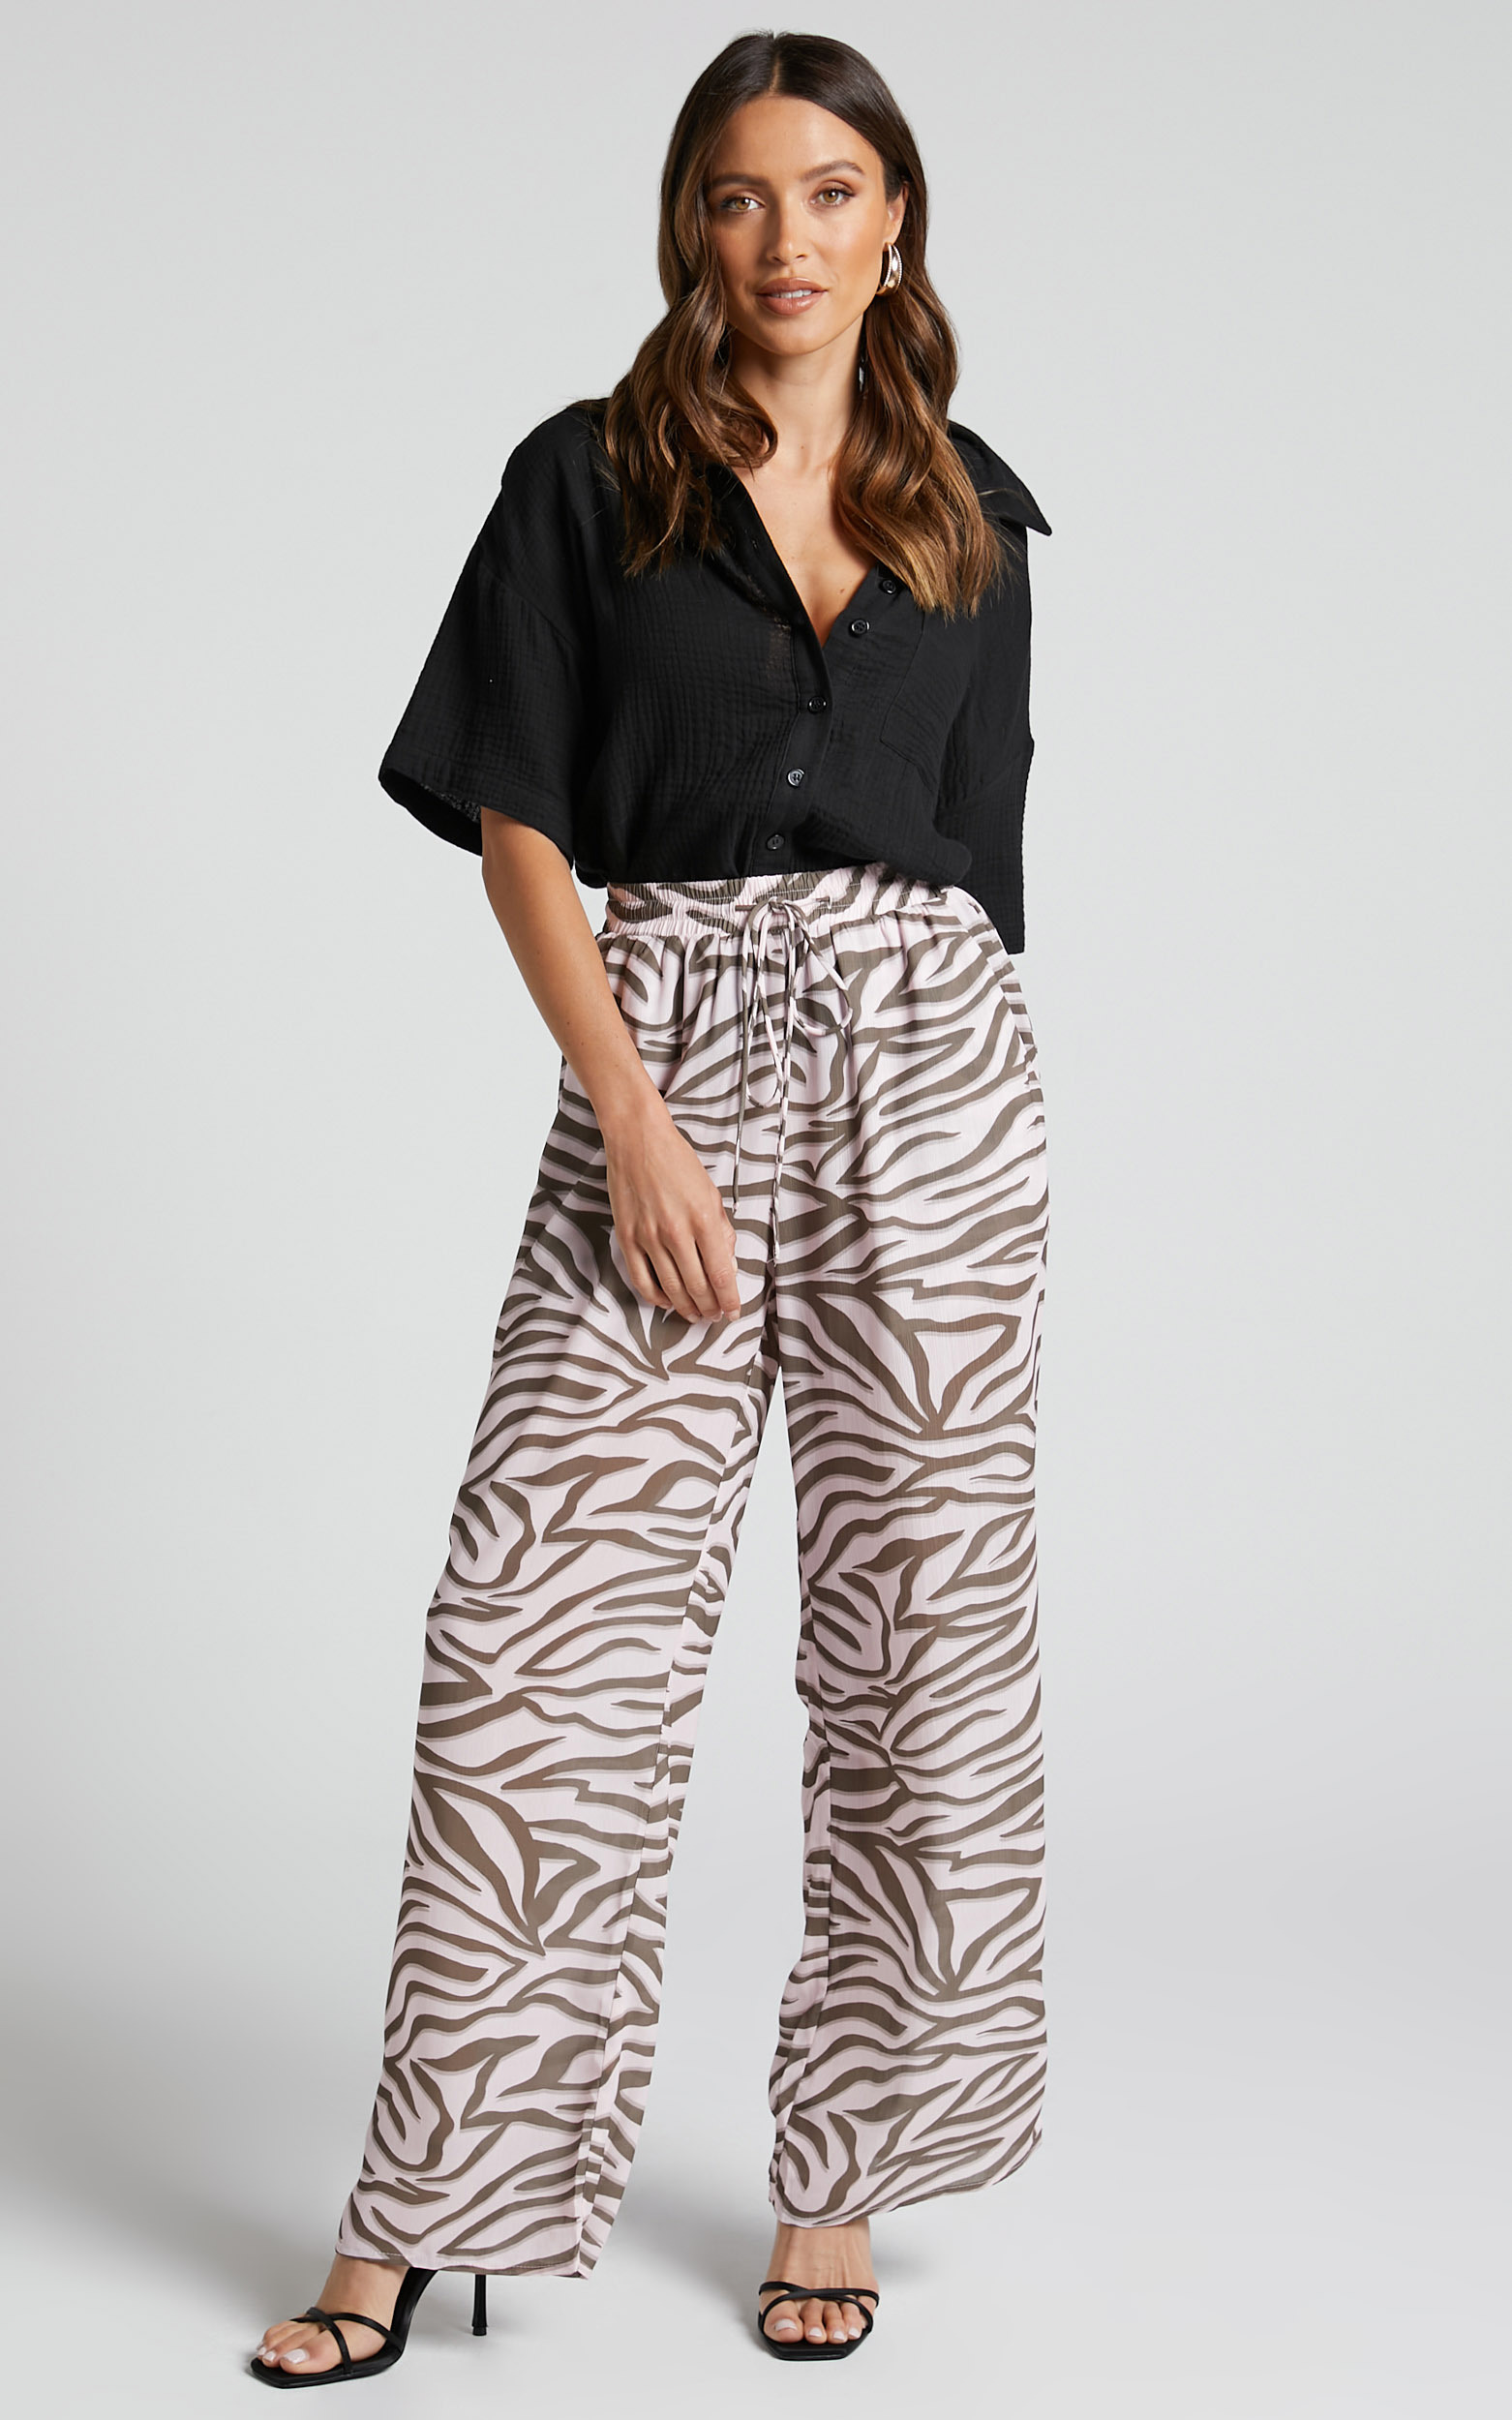 Aegir Pants - Mid Rise Relaxed Straight Leg Pants in Wild Zebra - 08, PNK1, hi-res image number null